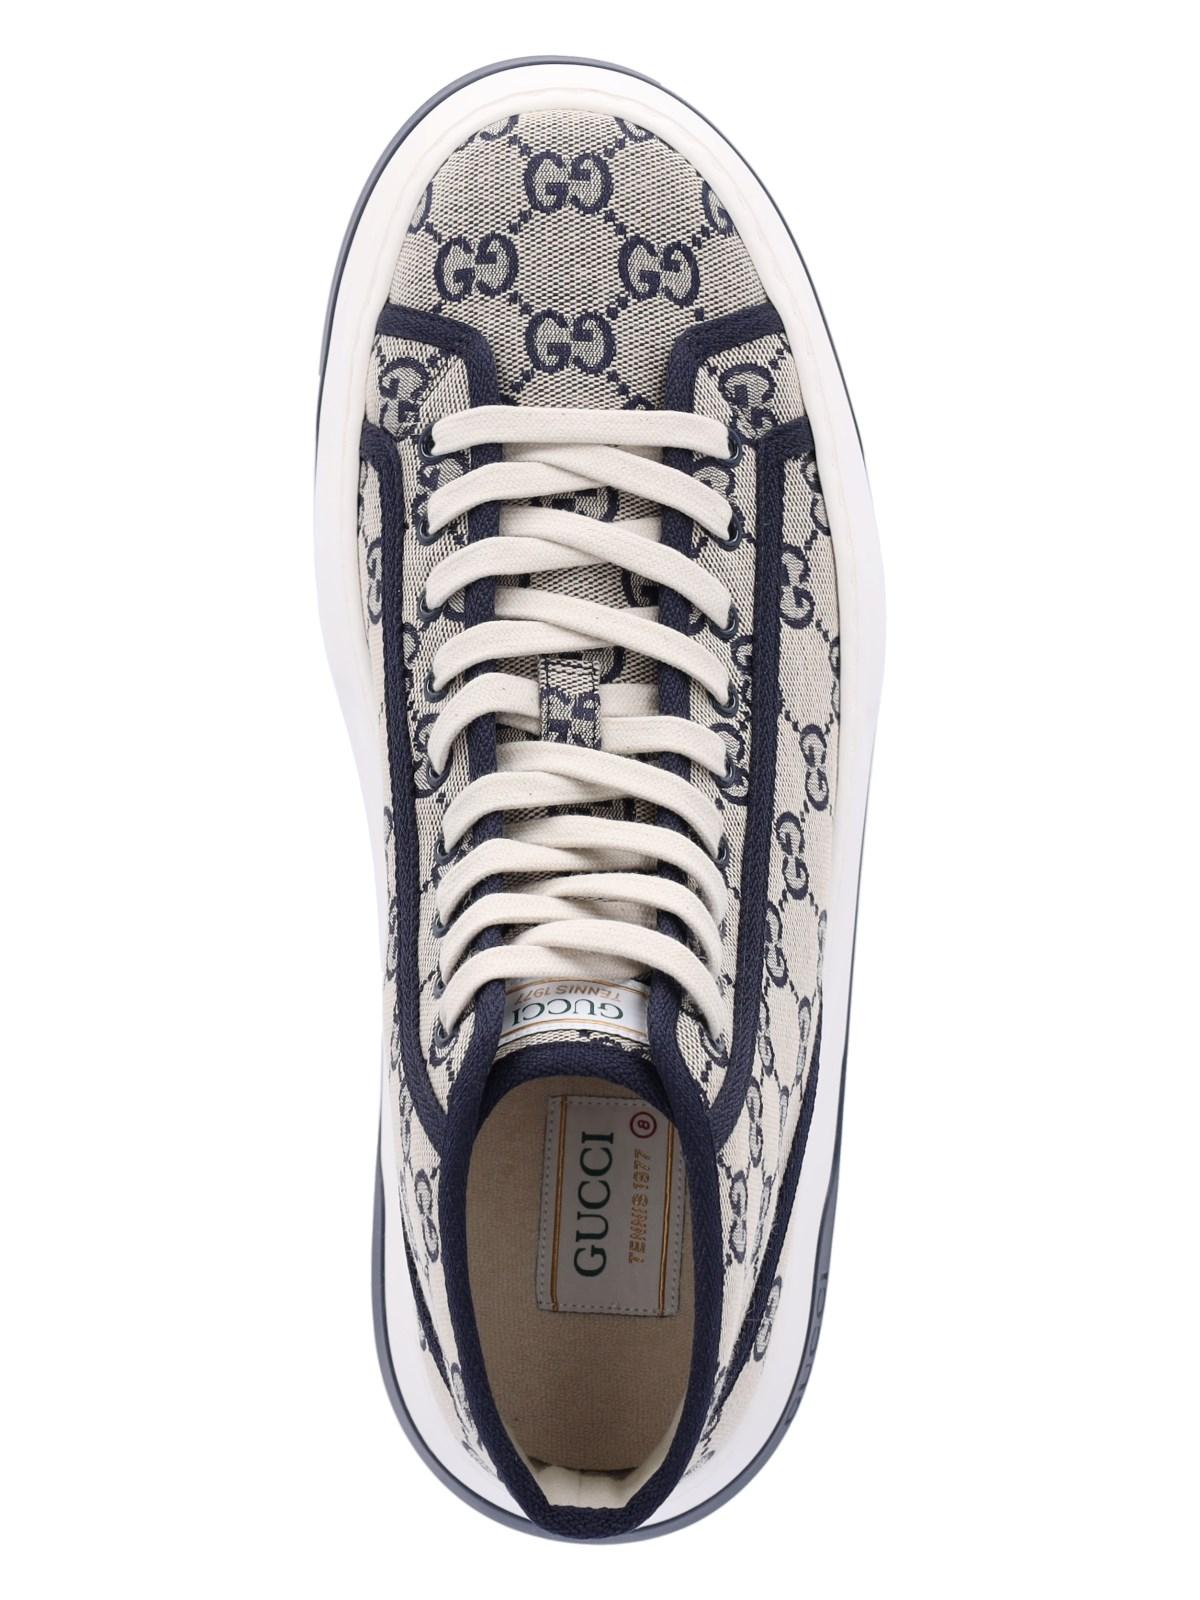 Gucci "Gg" High Sneakers in White for Men | Lyst